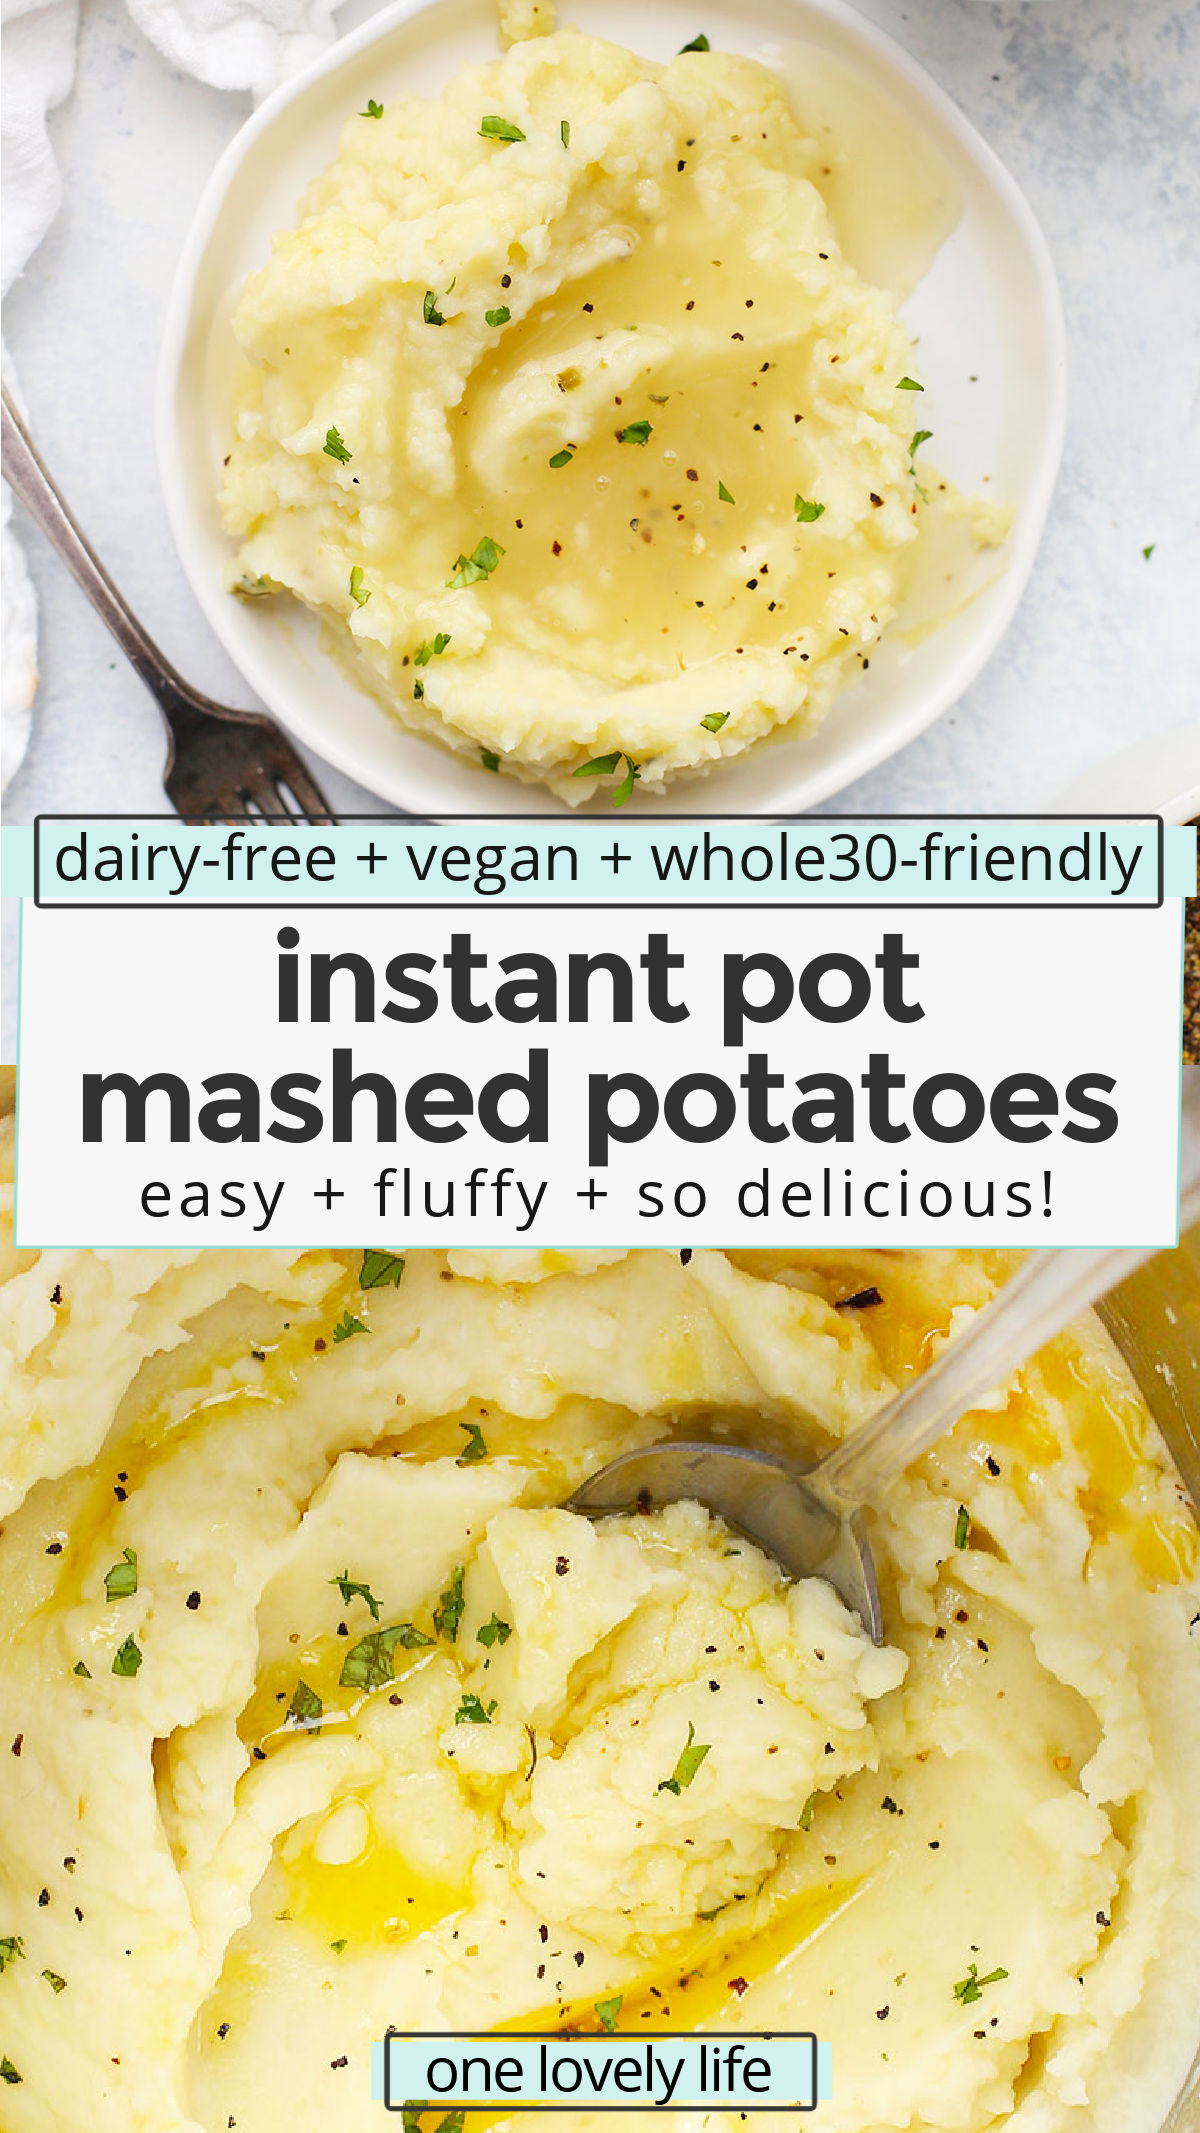 Instant Pot Mashed Potatoes - These creamy, fluffy mashed potatoes are so easy, thanks to the pressure cooker! They're the perfect accompaniment to a hearty home-cooked meal! (Gluten-free, dairy-free, vegan + Whole30 options!) / instant pot vegan mashed potatoes / instant pot dairy free mashed potatoes // instant pot whole30 mashed potatoes / Pressure cooker mashed potatoes / dairy free mashed potatoes / #mashedpotatoes #thanksgiving #glutenfree #vegan #whole30